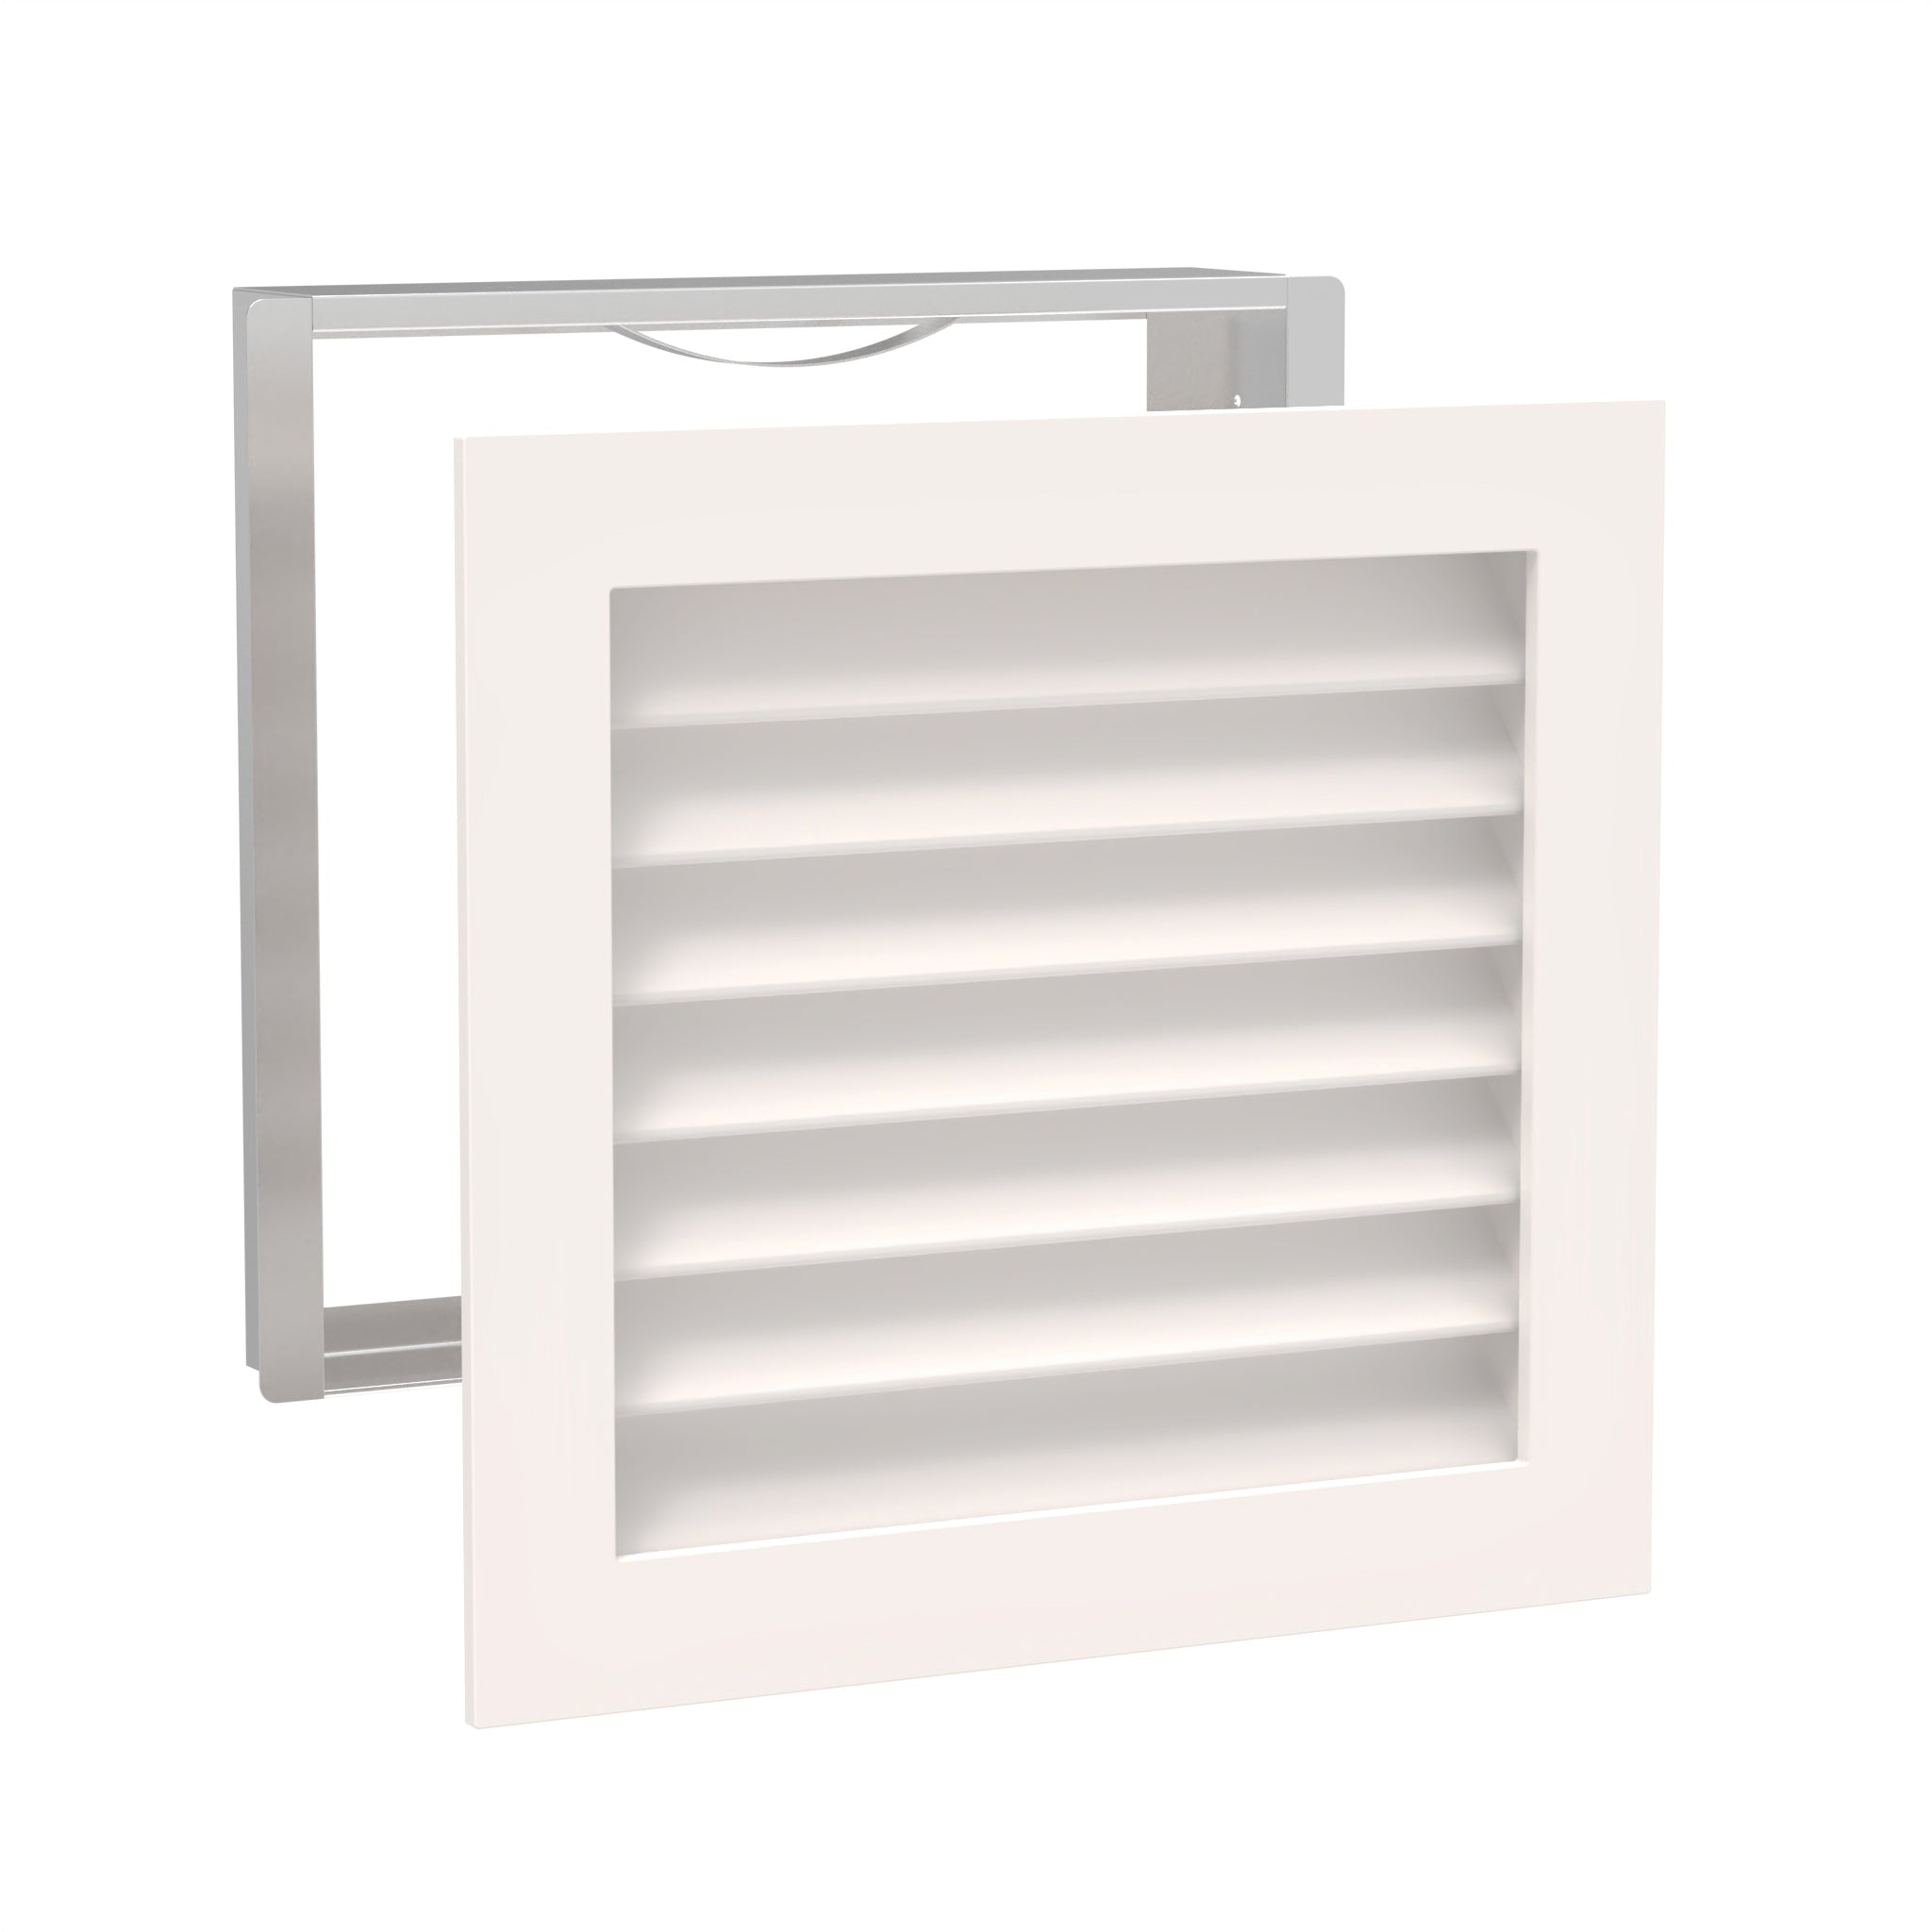 Worth Home Products - decorative wood AC vent covers luxury return vent - Primed Wood Louvers 16x16